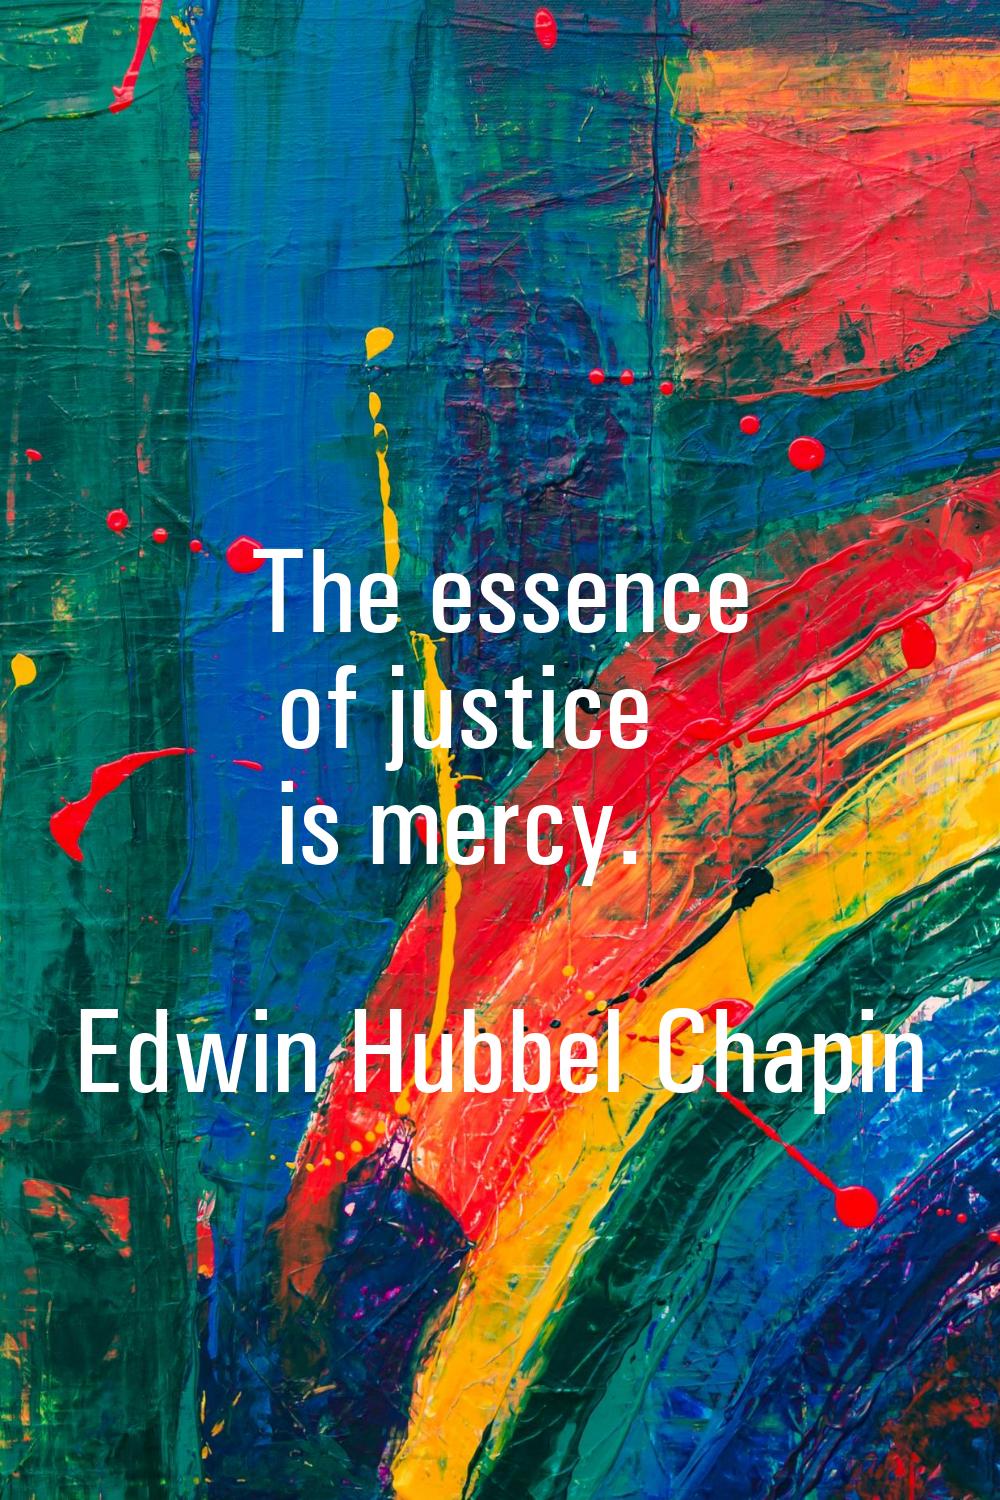 The essence of justice is mercy.